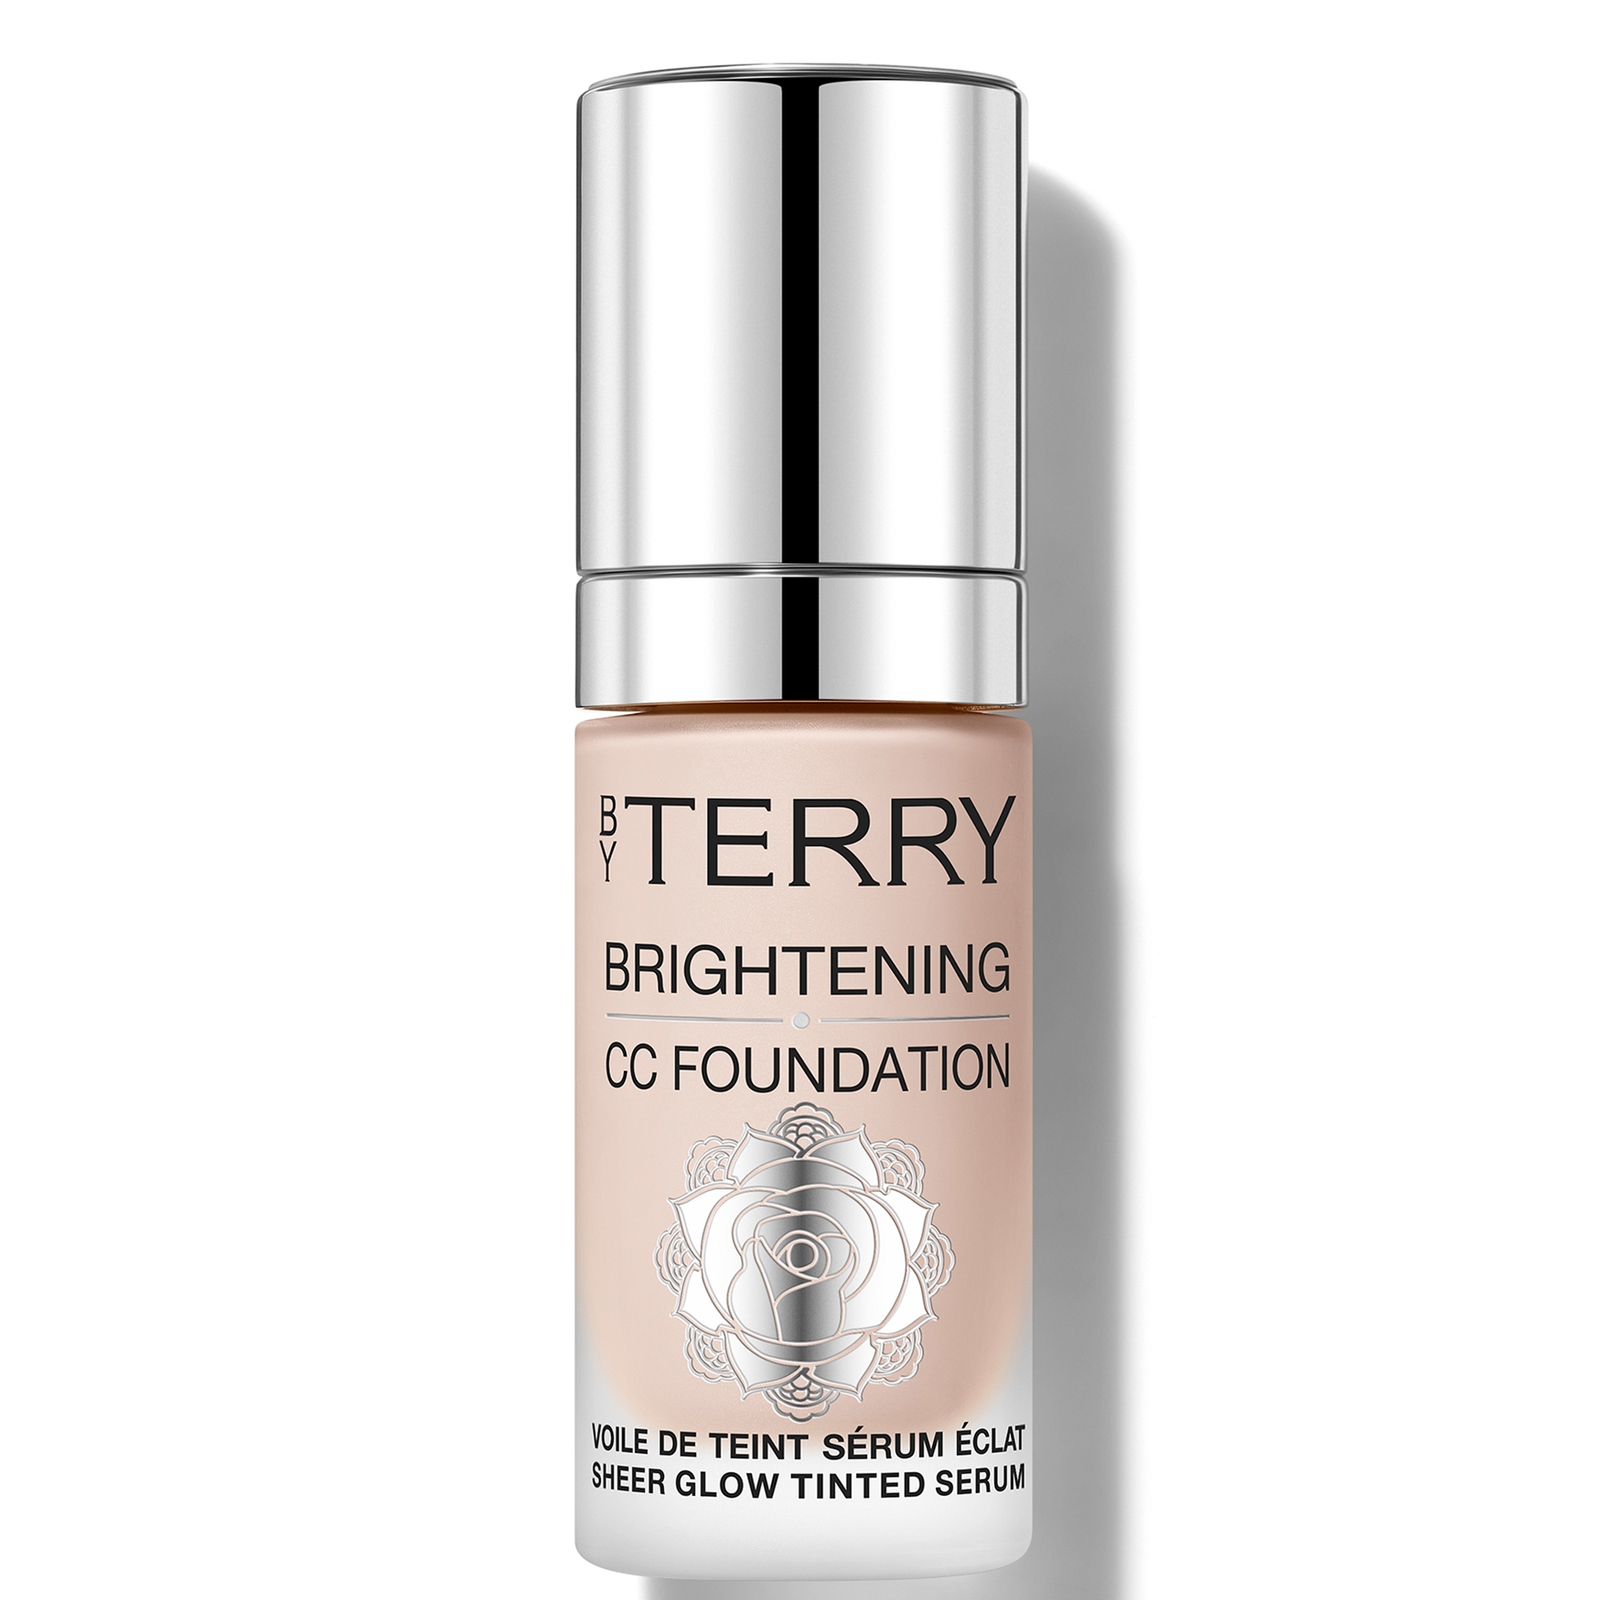 By Terry Brightening Cc Foundation 30ml (various Shades) - 1c In Neutral